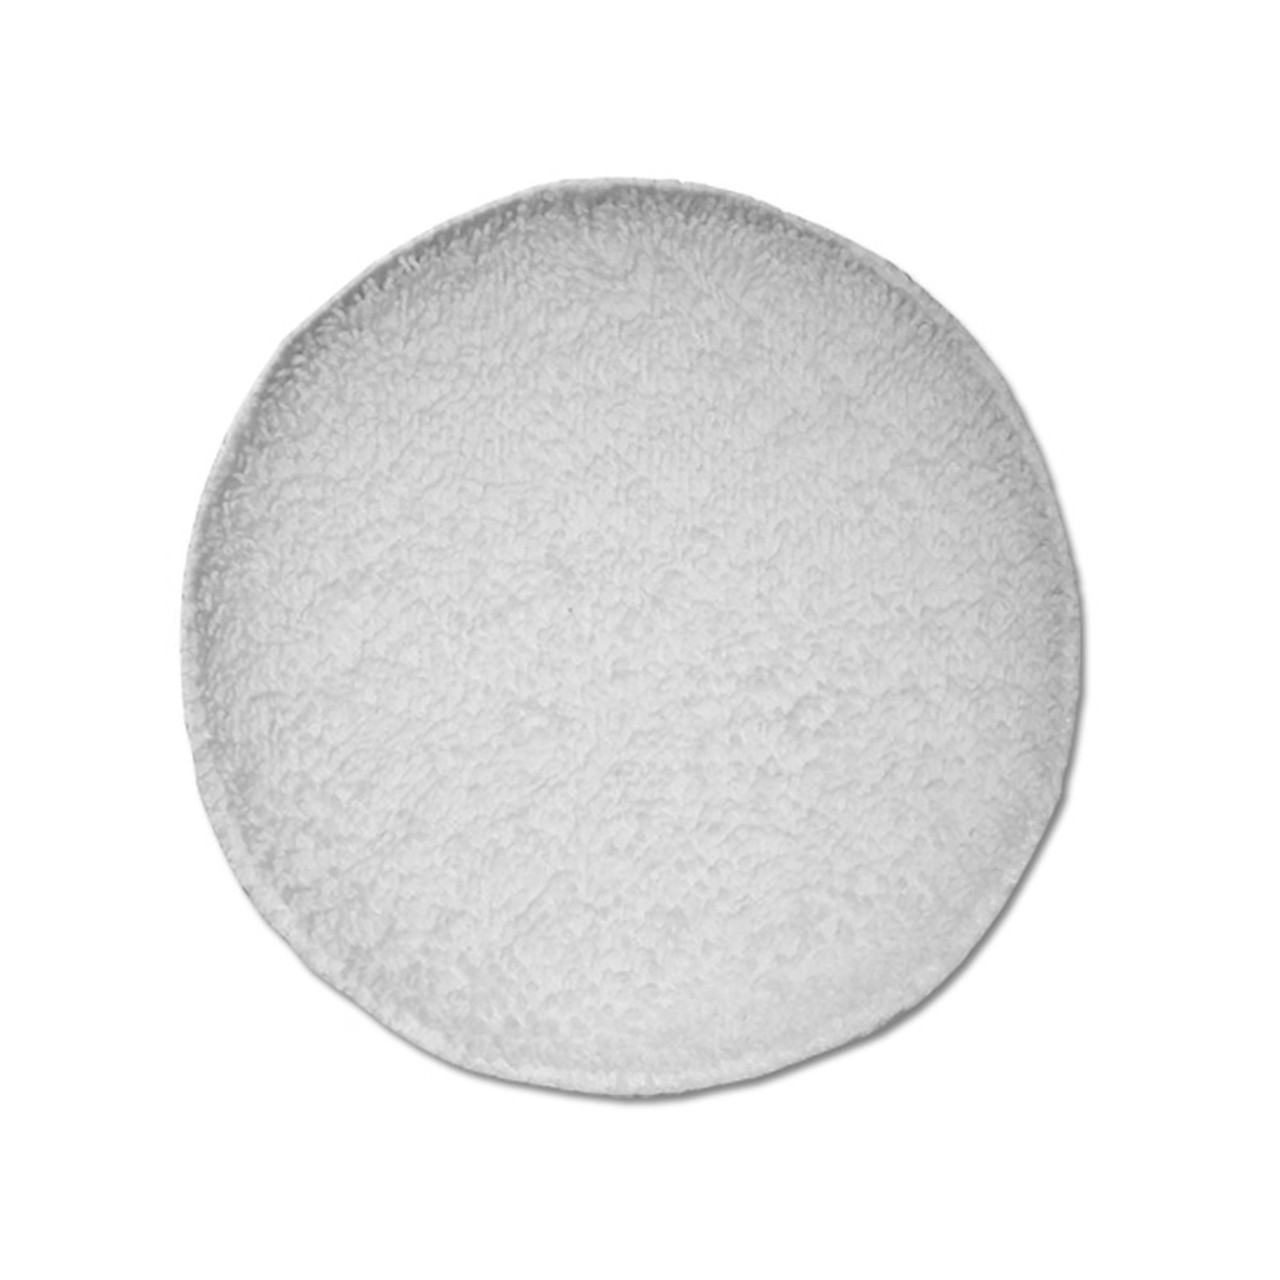 CWS 3T, 5 inch Round White Terry Wax Applicator Pad